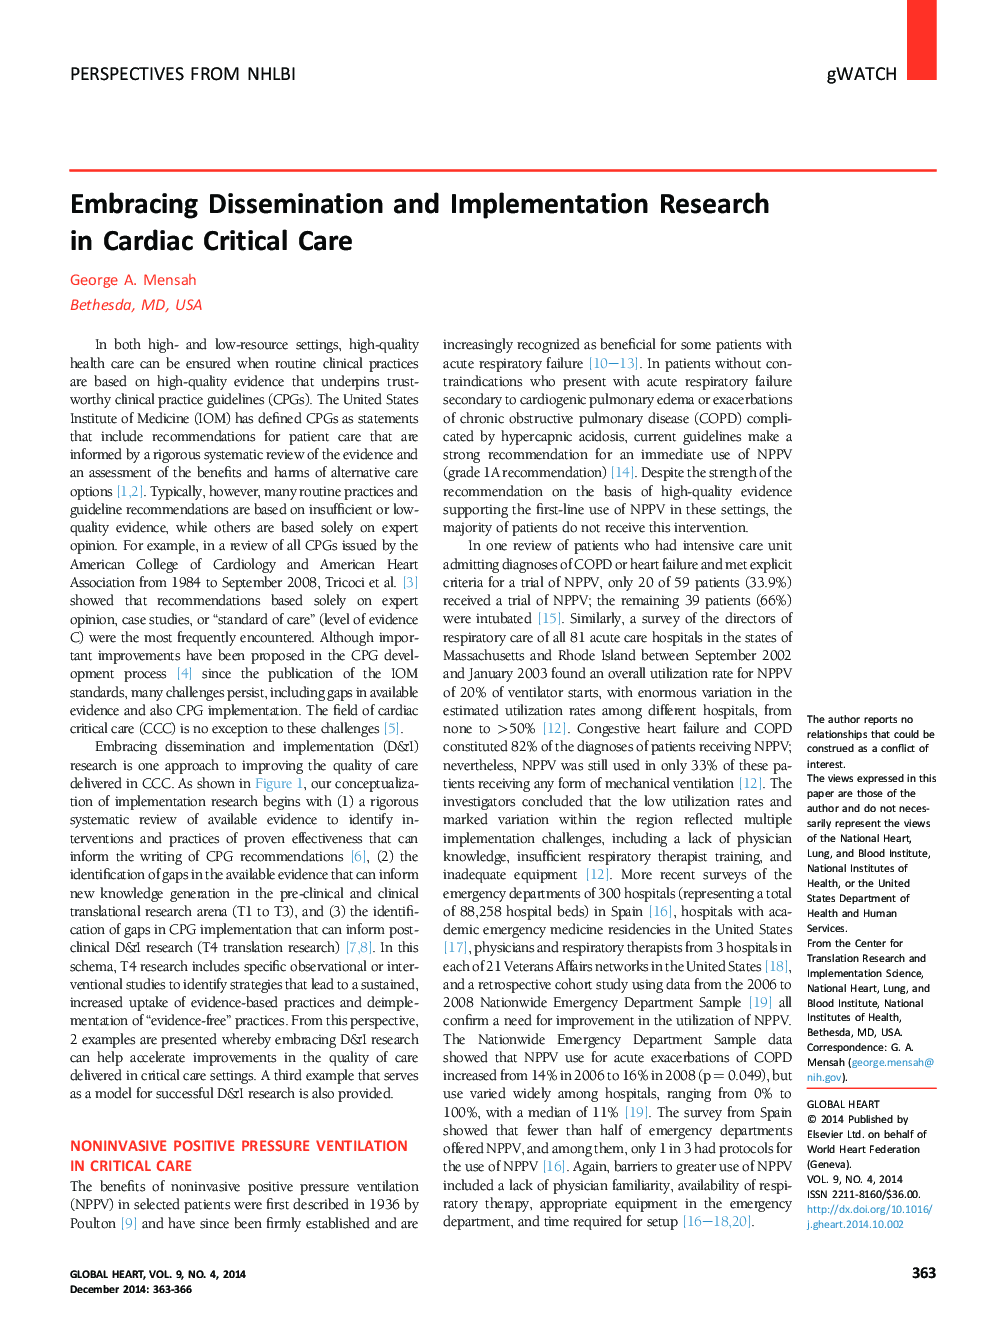 Embracing Dissemination and Implementation Research in Cardiac Critical Care